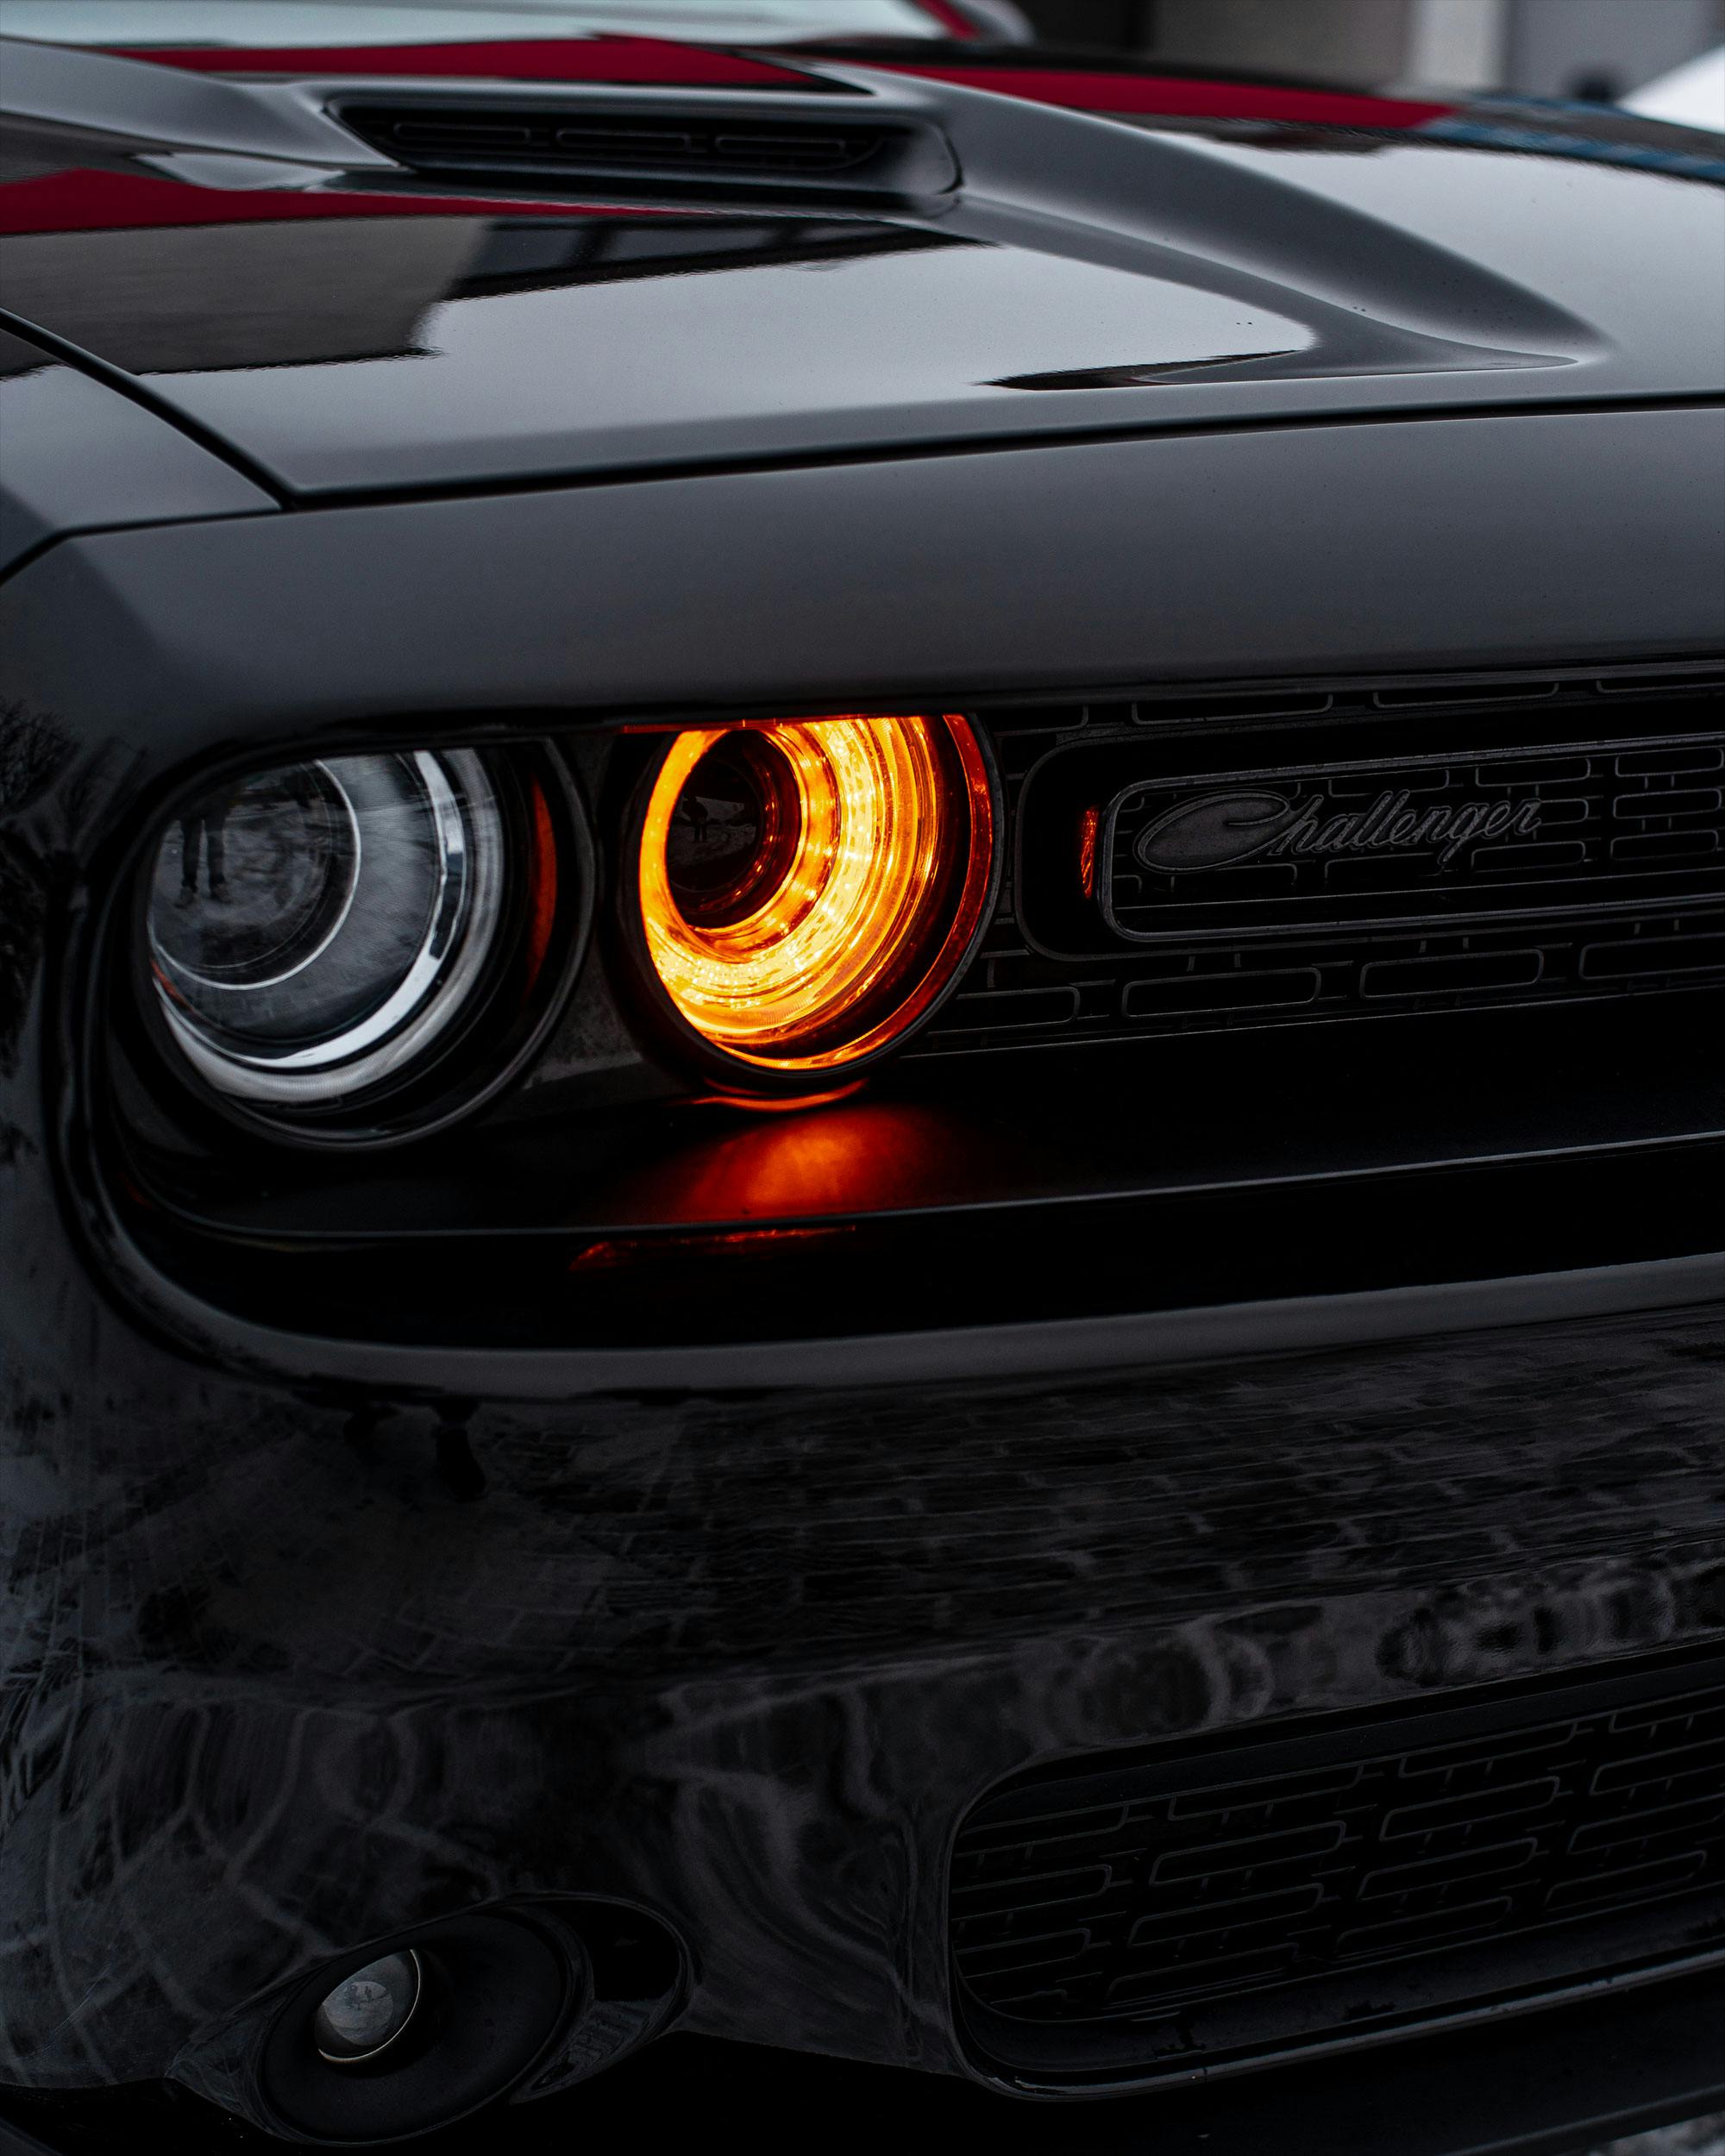 dodge challenger hd iPhone Wallpapers Free Download